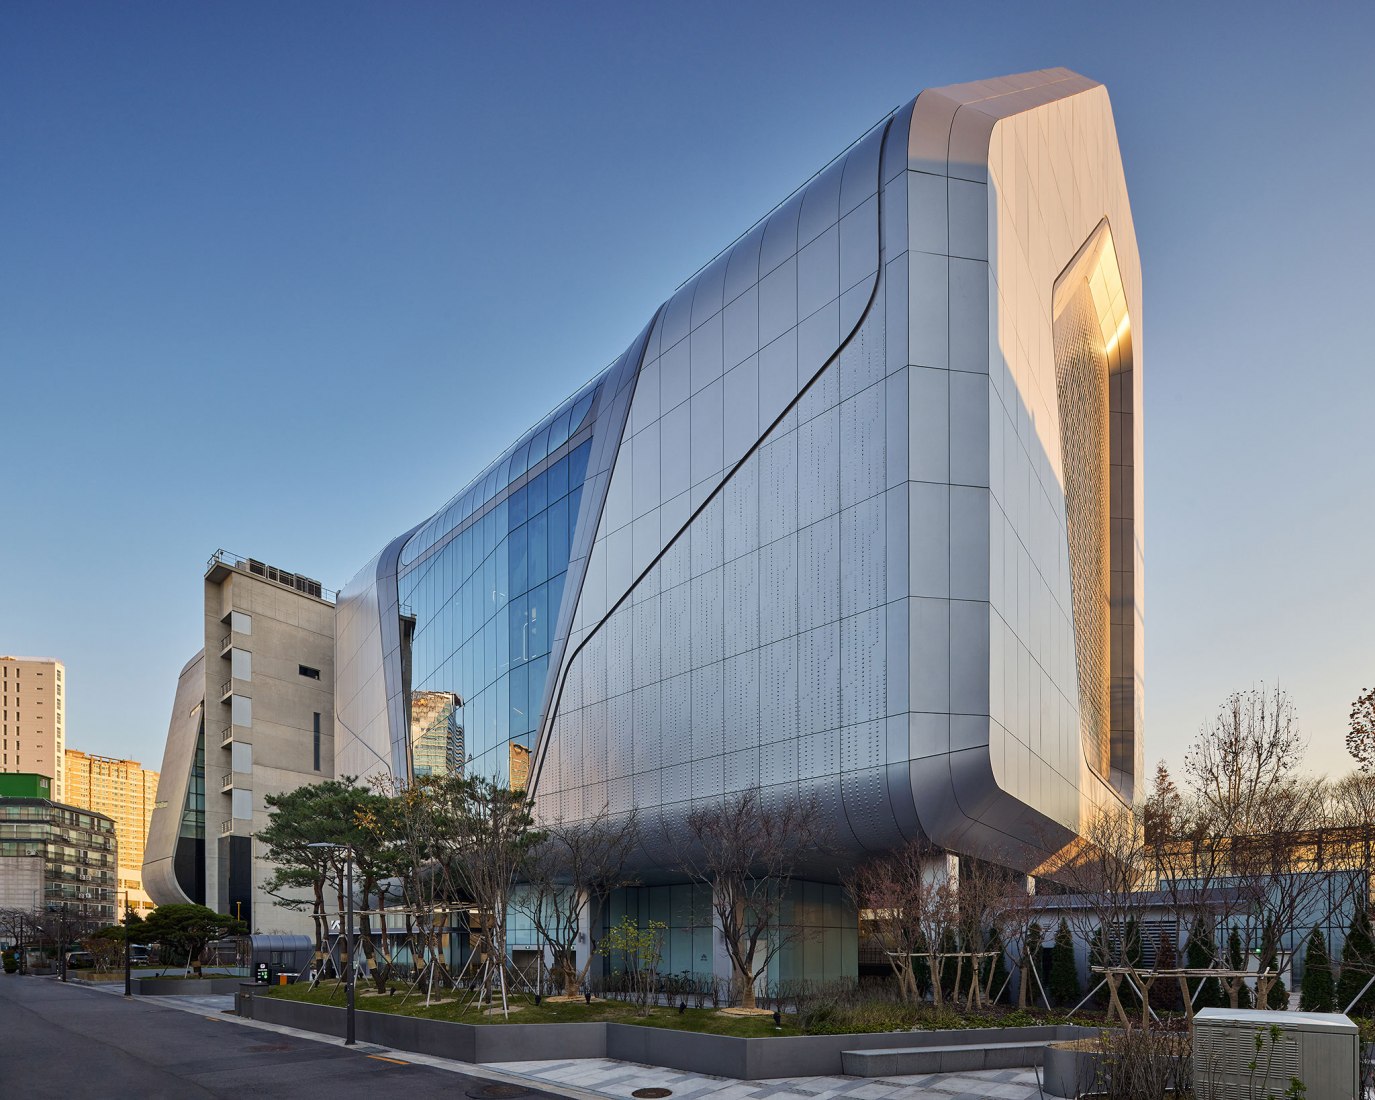 HQ center for YG Entertainment by UNStudio. Photograph by Rohspace